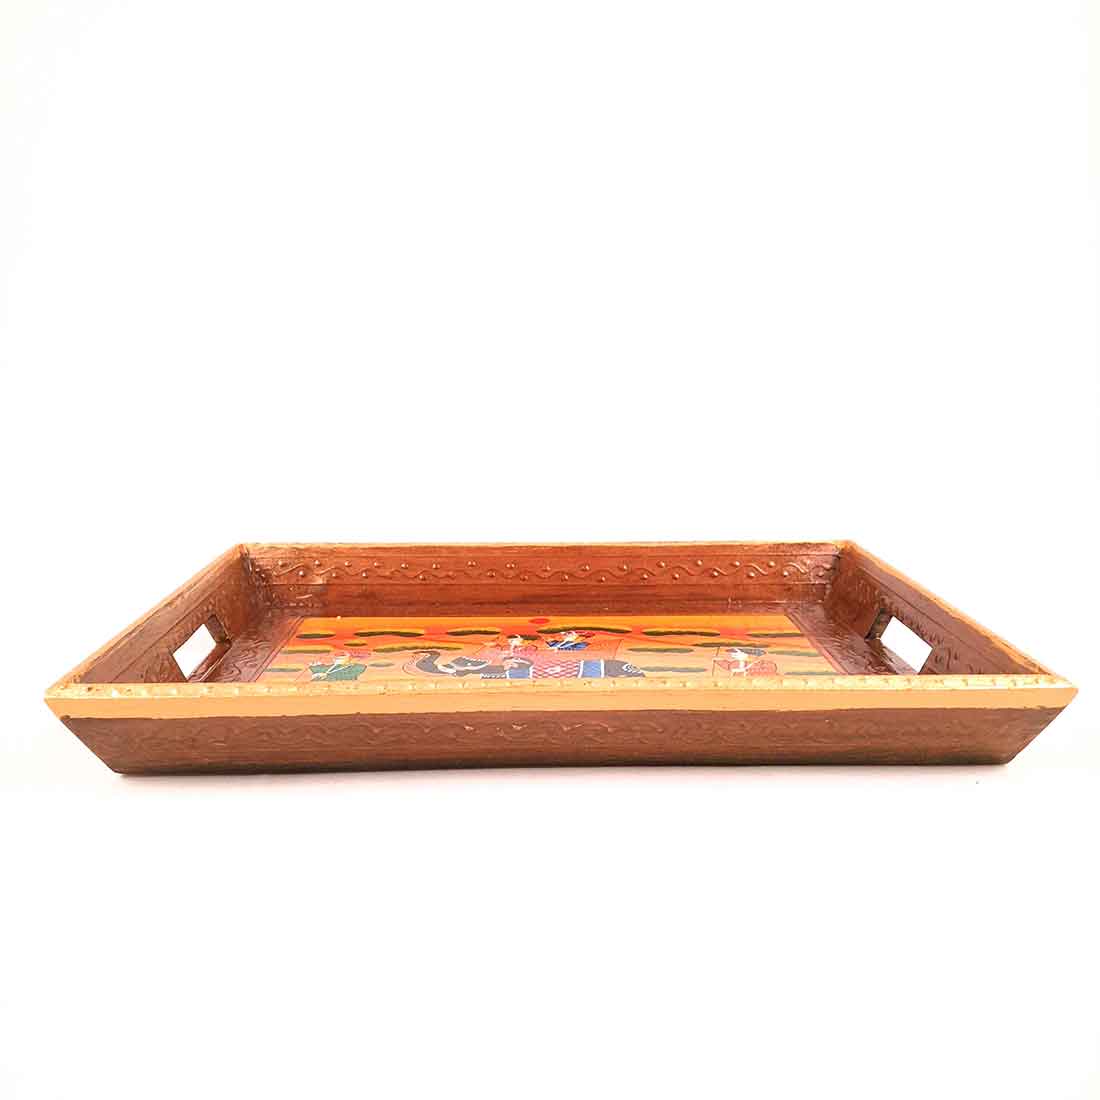 Serving Wooden Tray | Decorative Tray - for Kitchen, Serving & Gifting - 13 Inch - Apkamart#Style_Pack of 2